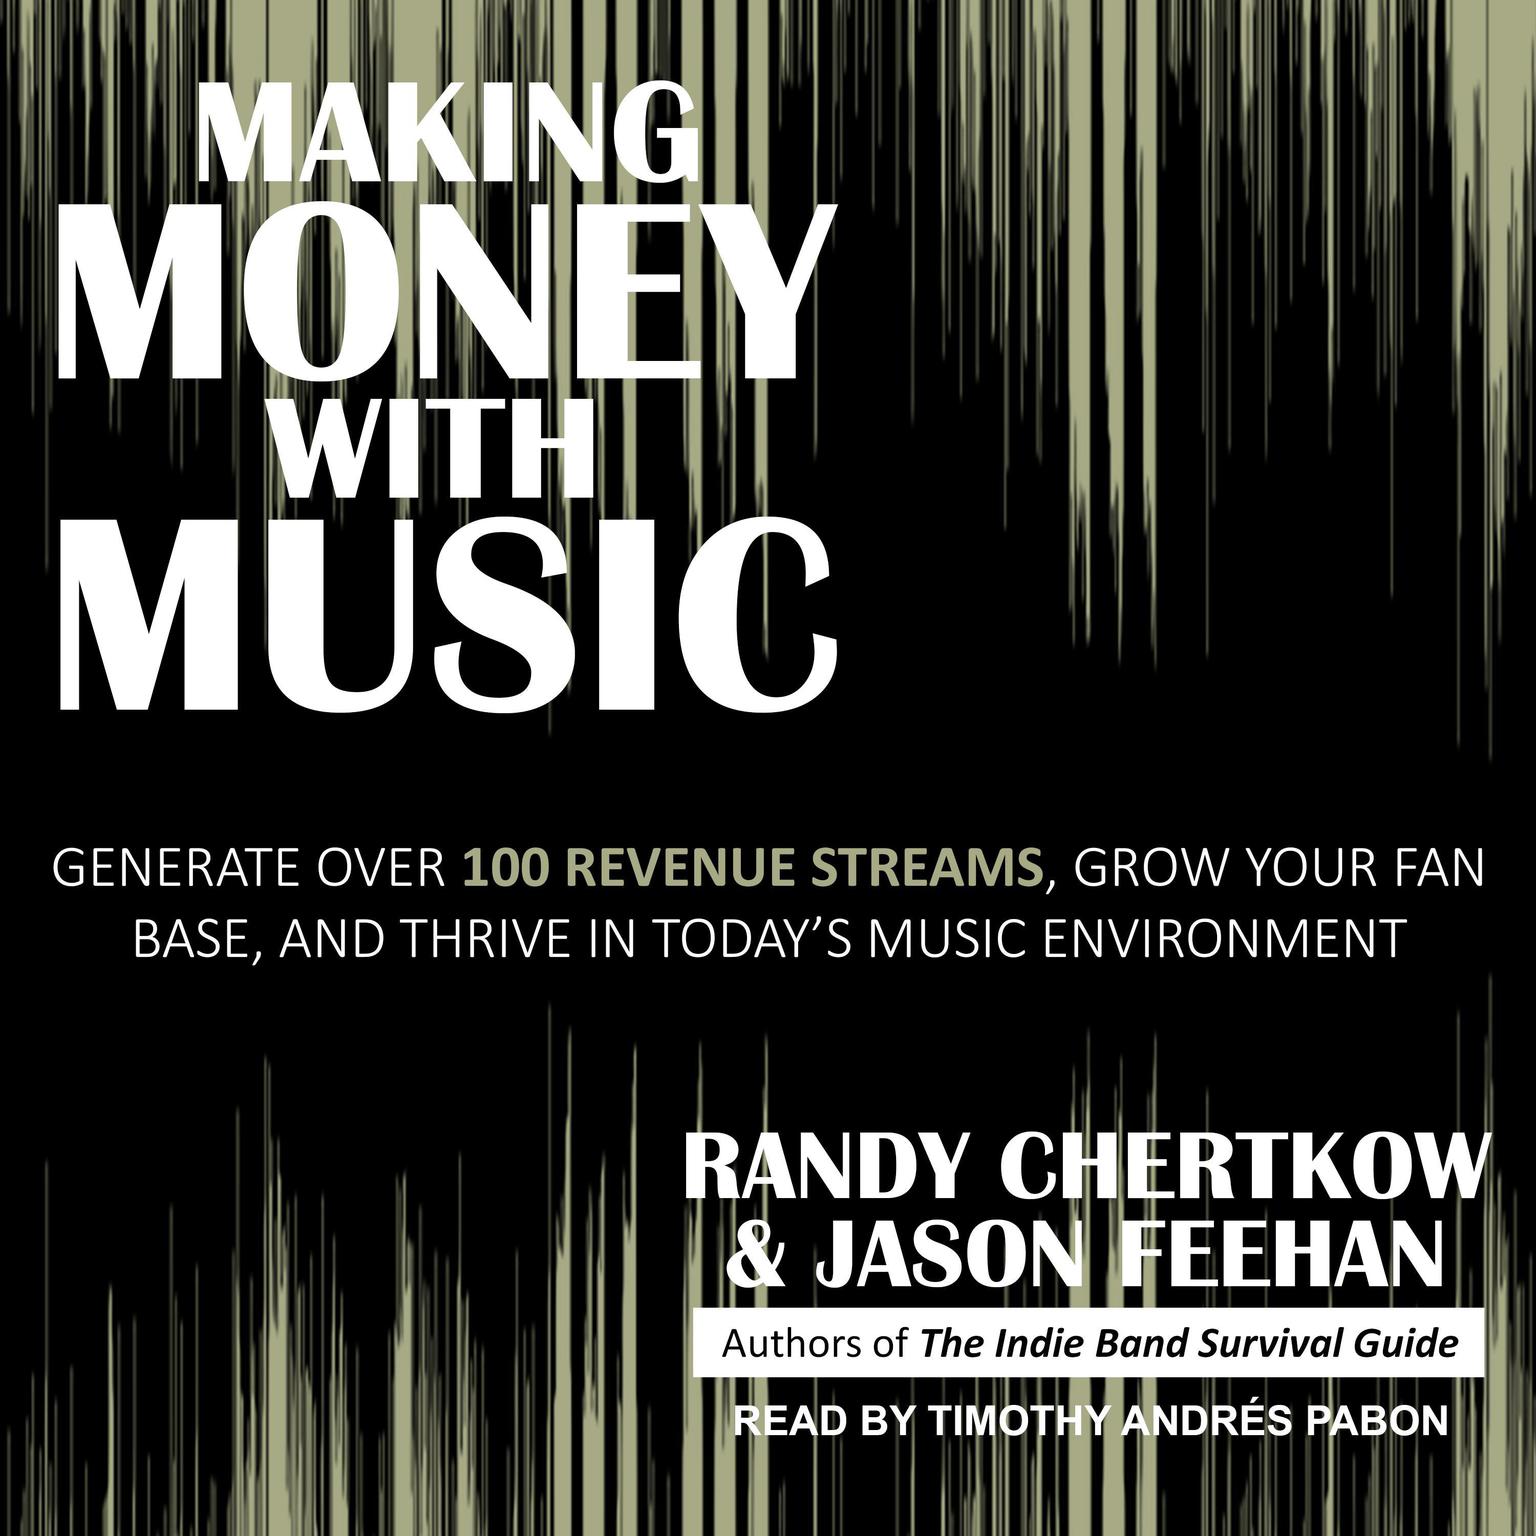 Making Money with Music: Generate Over 100 Revenue Streams, Grow Your Fan Base, and Thrive in Todays Music Environment Audiobook, by Randy Chertkow